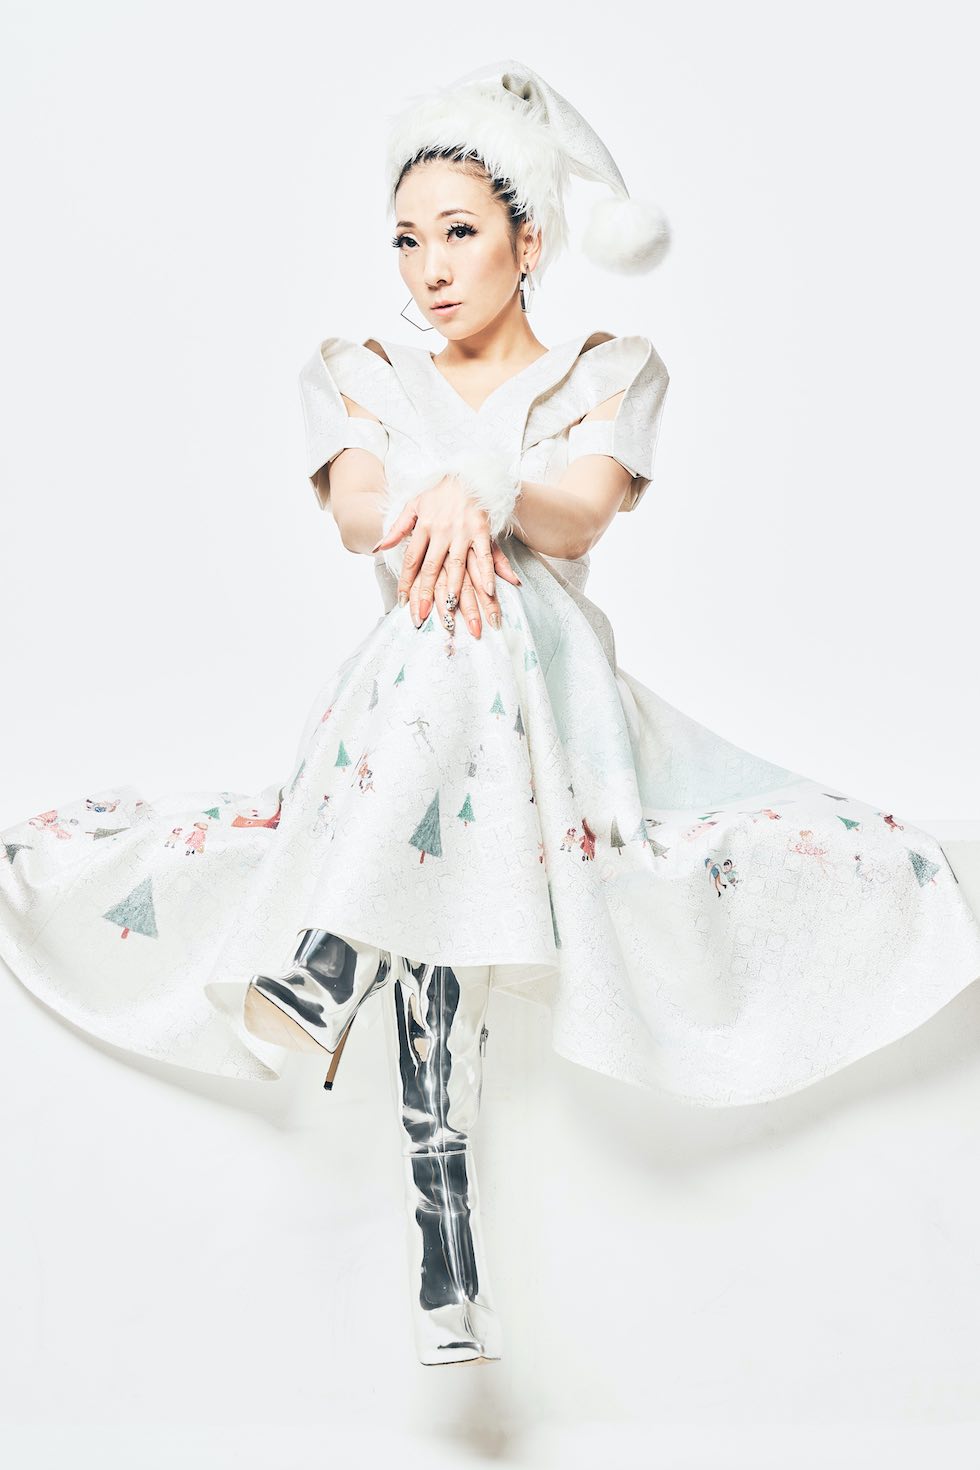 MISIA、生放送でリスナーに元気な声をお届け！